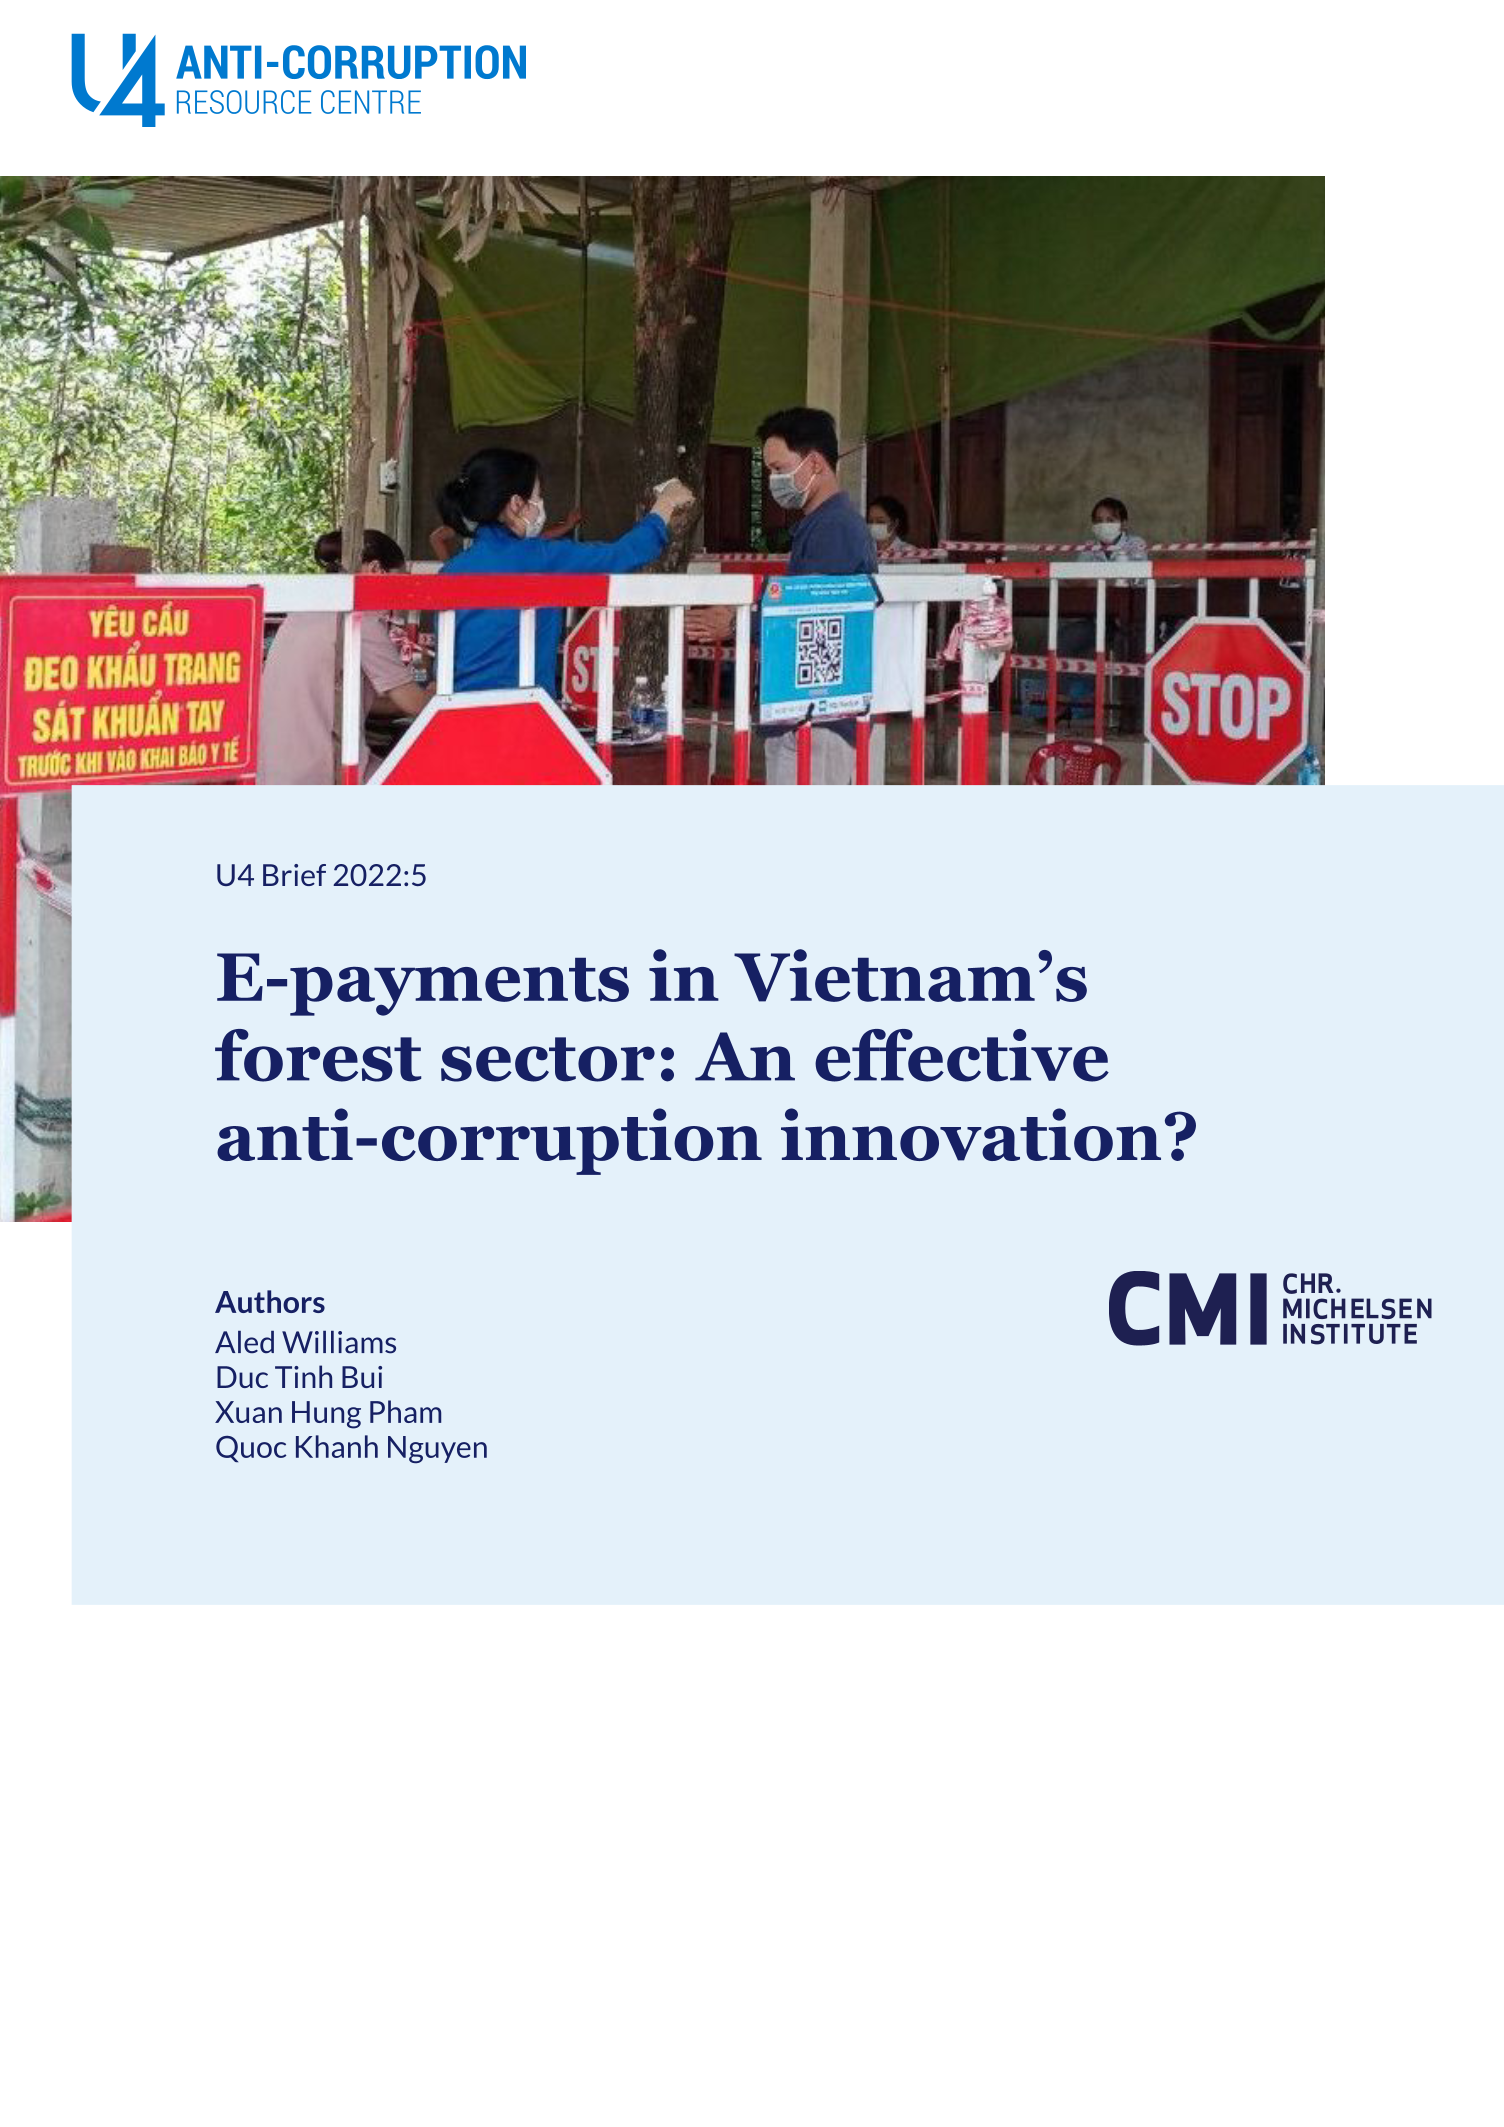 E-payments in Vietnam’s forest sector: An effective anti-corruption innovation?